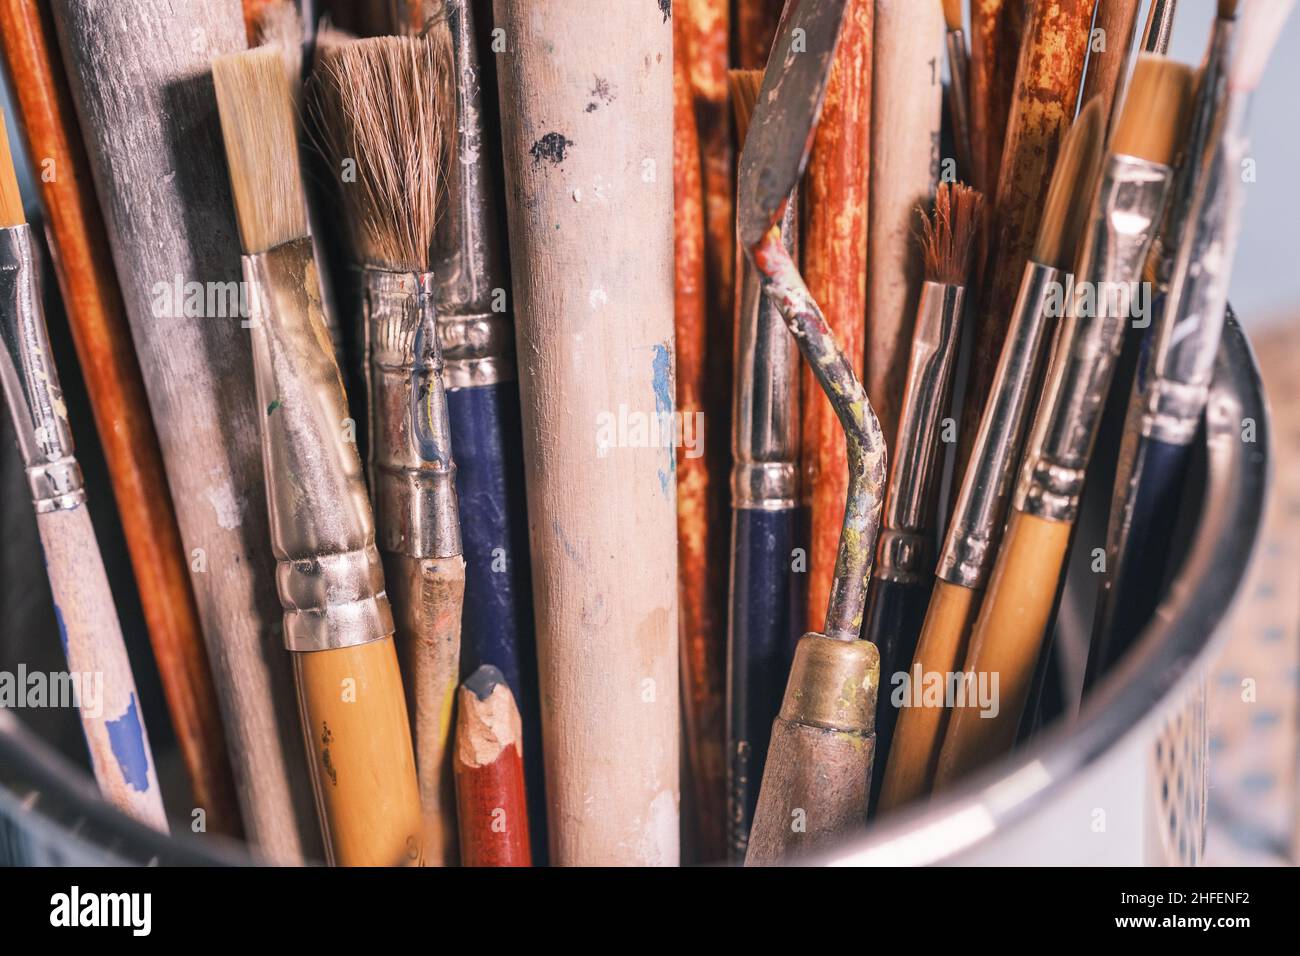 A bunch of well used painter's brushes with wooden handle in a metal bucket. Creative background Stock Photo